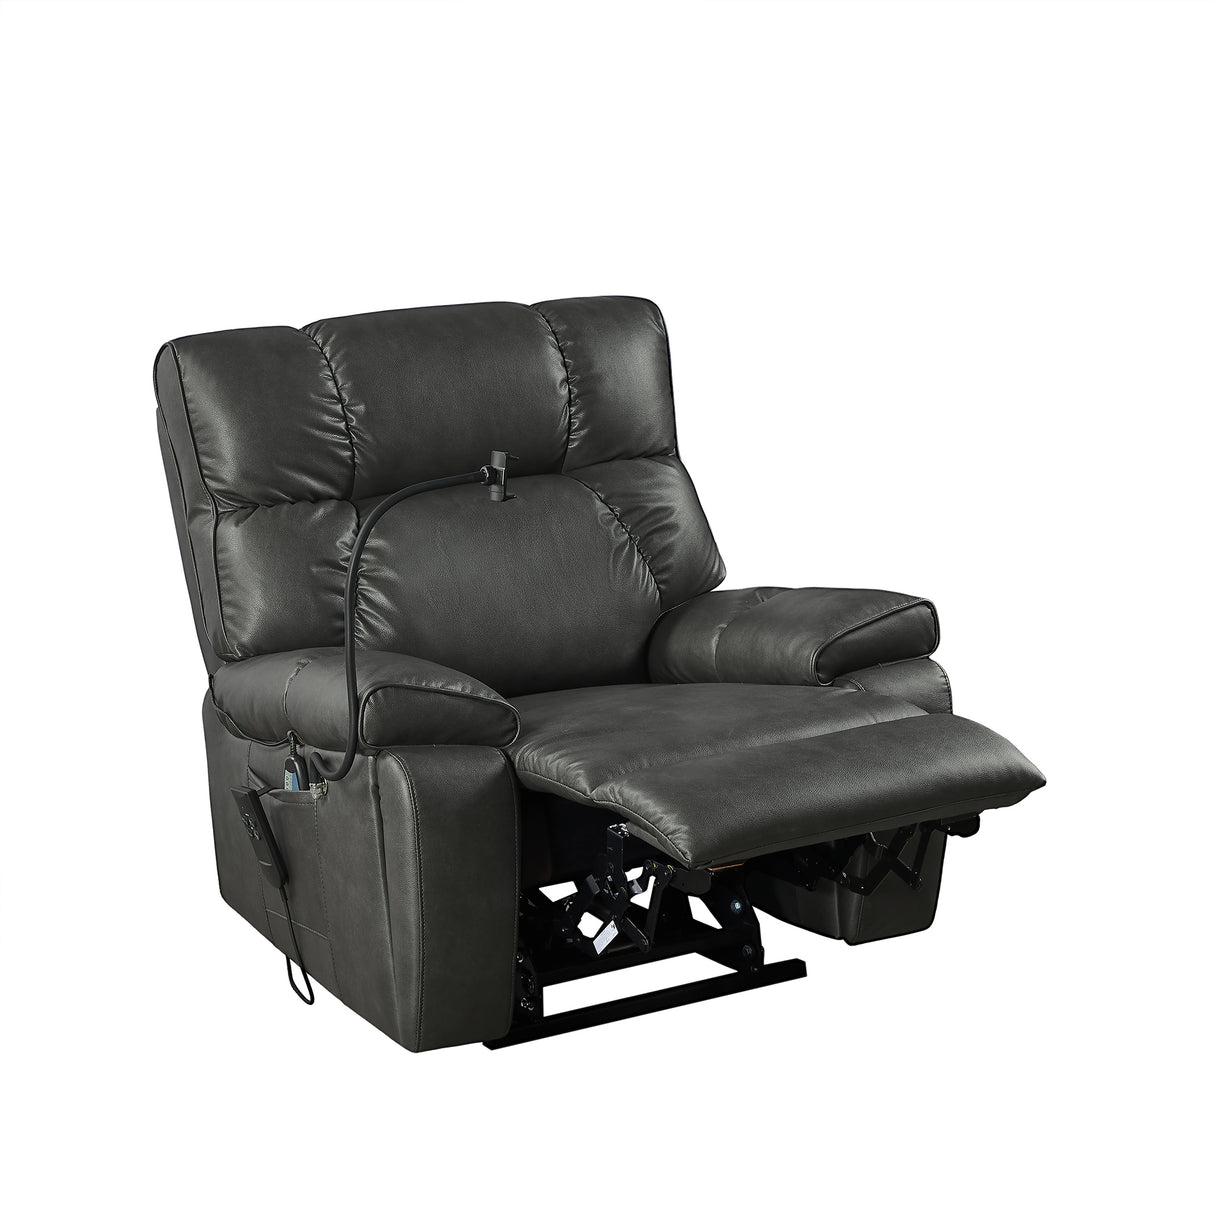 Recliner Chair with Phone Holder,Electric Power Lift Recliner Chair with 2 Motors Massage and Heat for Elderly, 3 Positions, 2 Side Pockets, Cup Holders Home Elegance USA